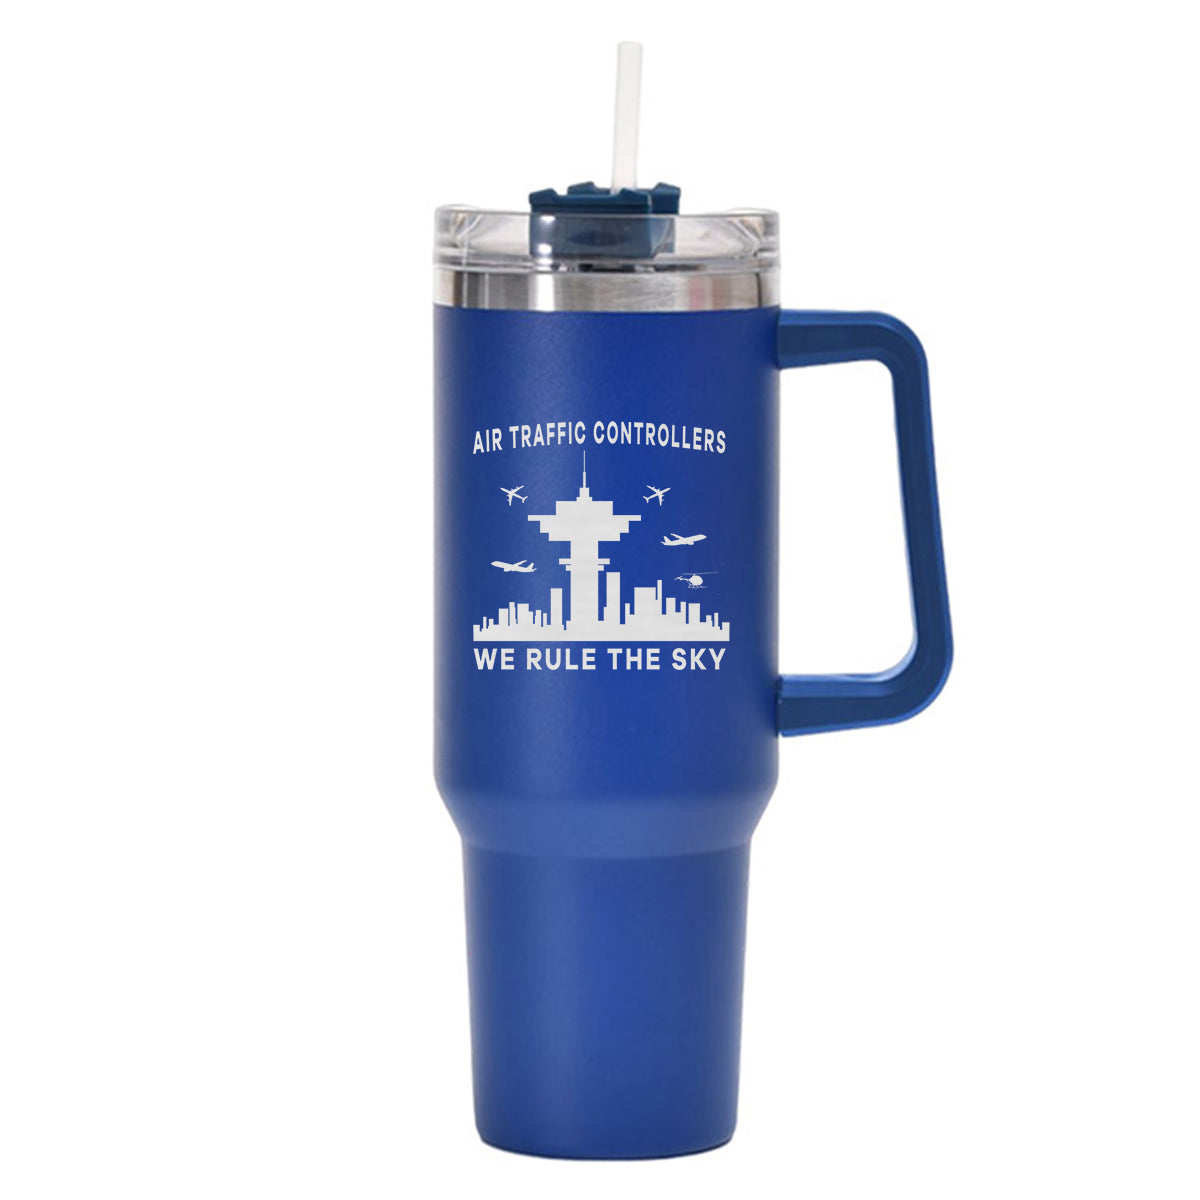 Air Traffic Controllers - We Rule The Sky Designed 40oz Stainless Steel Car Mug With Holder